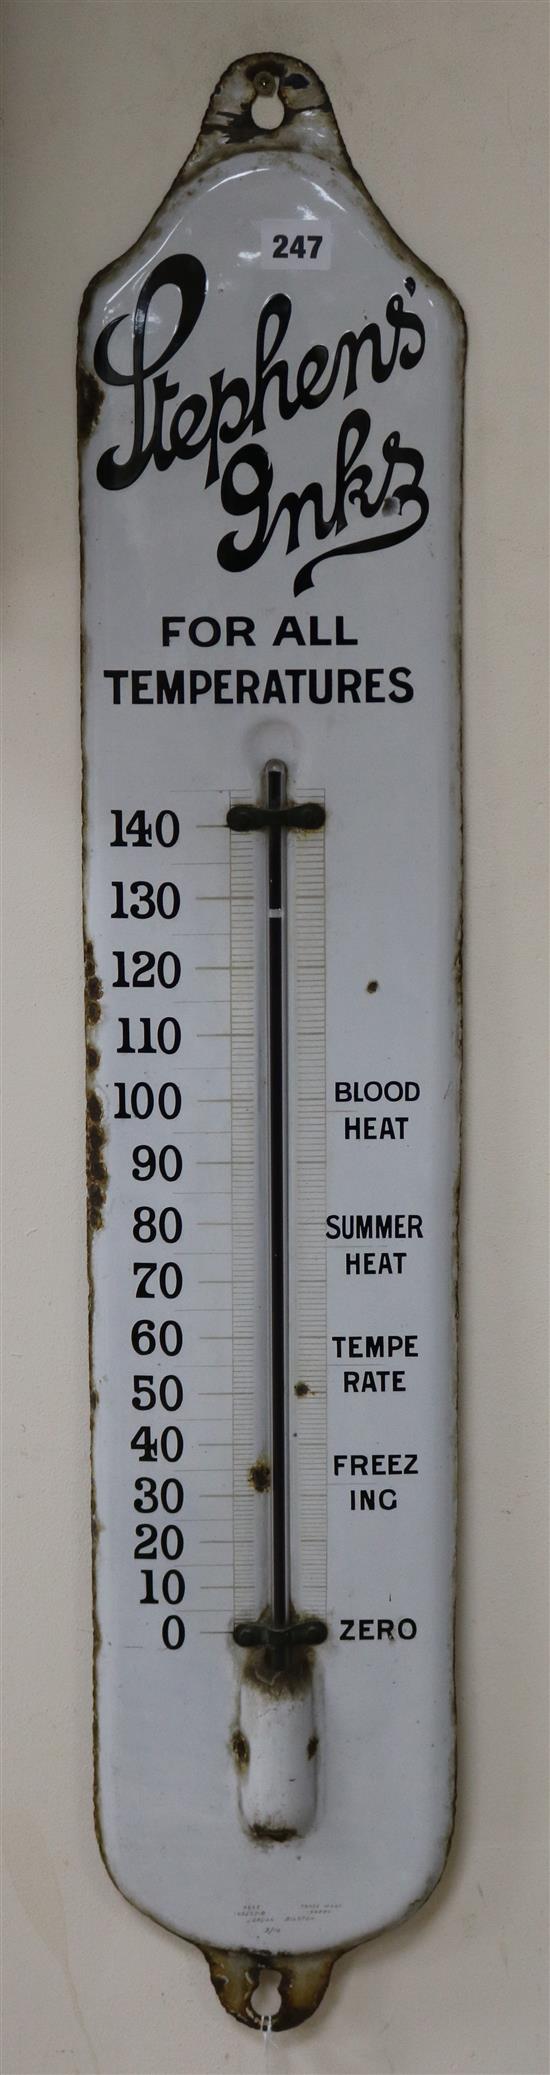 A Stephens Inks For all Temperatures enamelled thermometer sign length 93.5cm